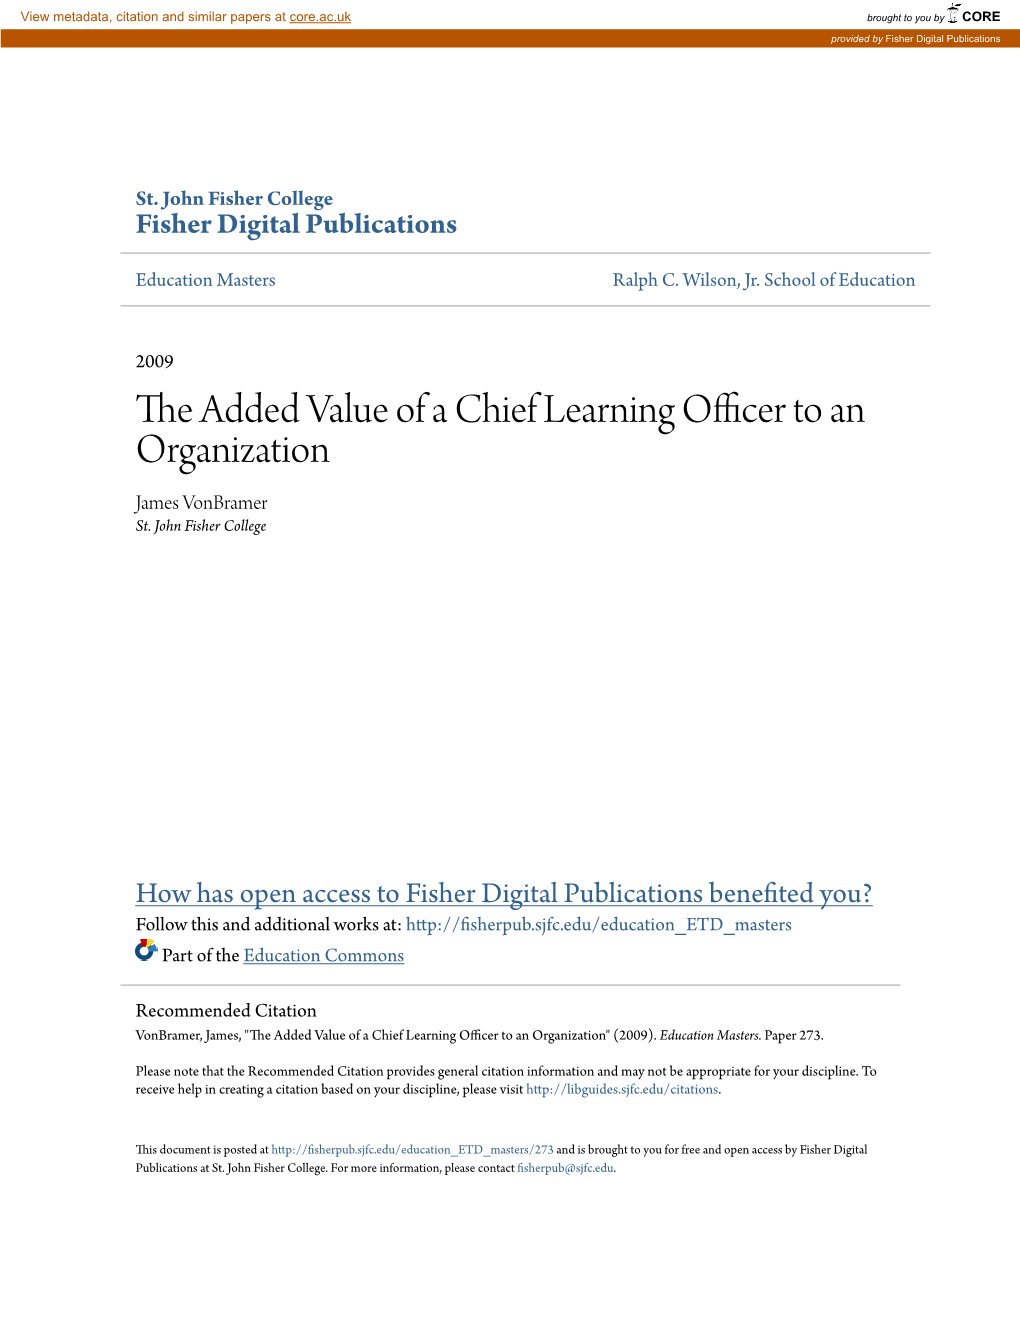 The Added Value of a Chief Learning Officer to an Organization" (2009)